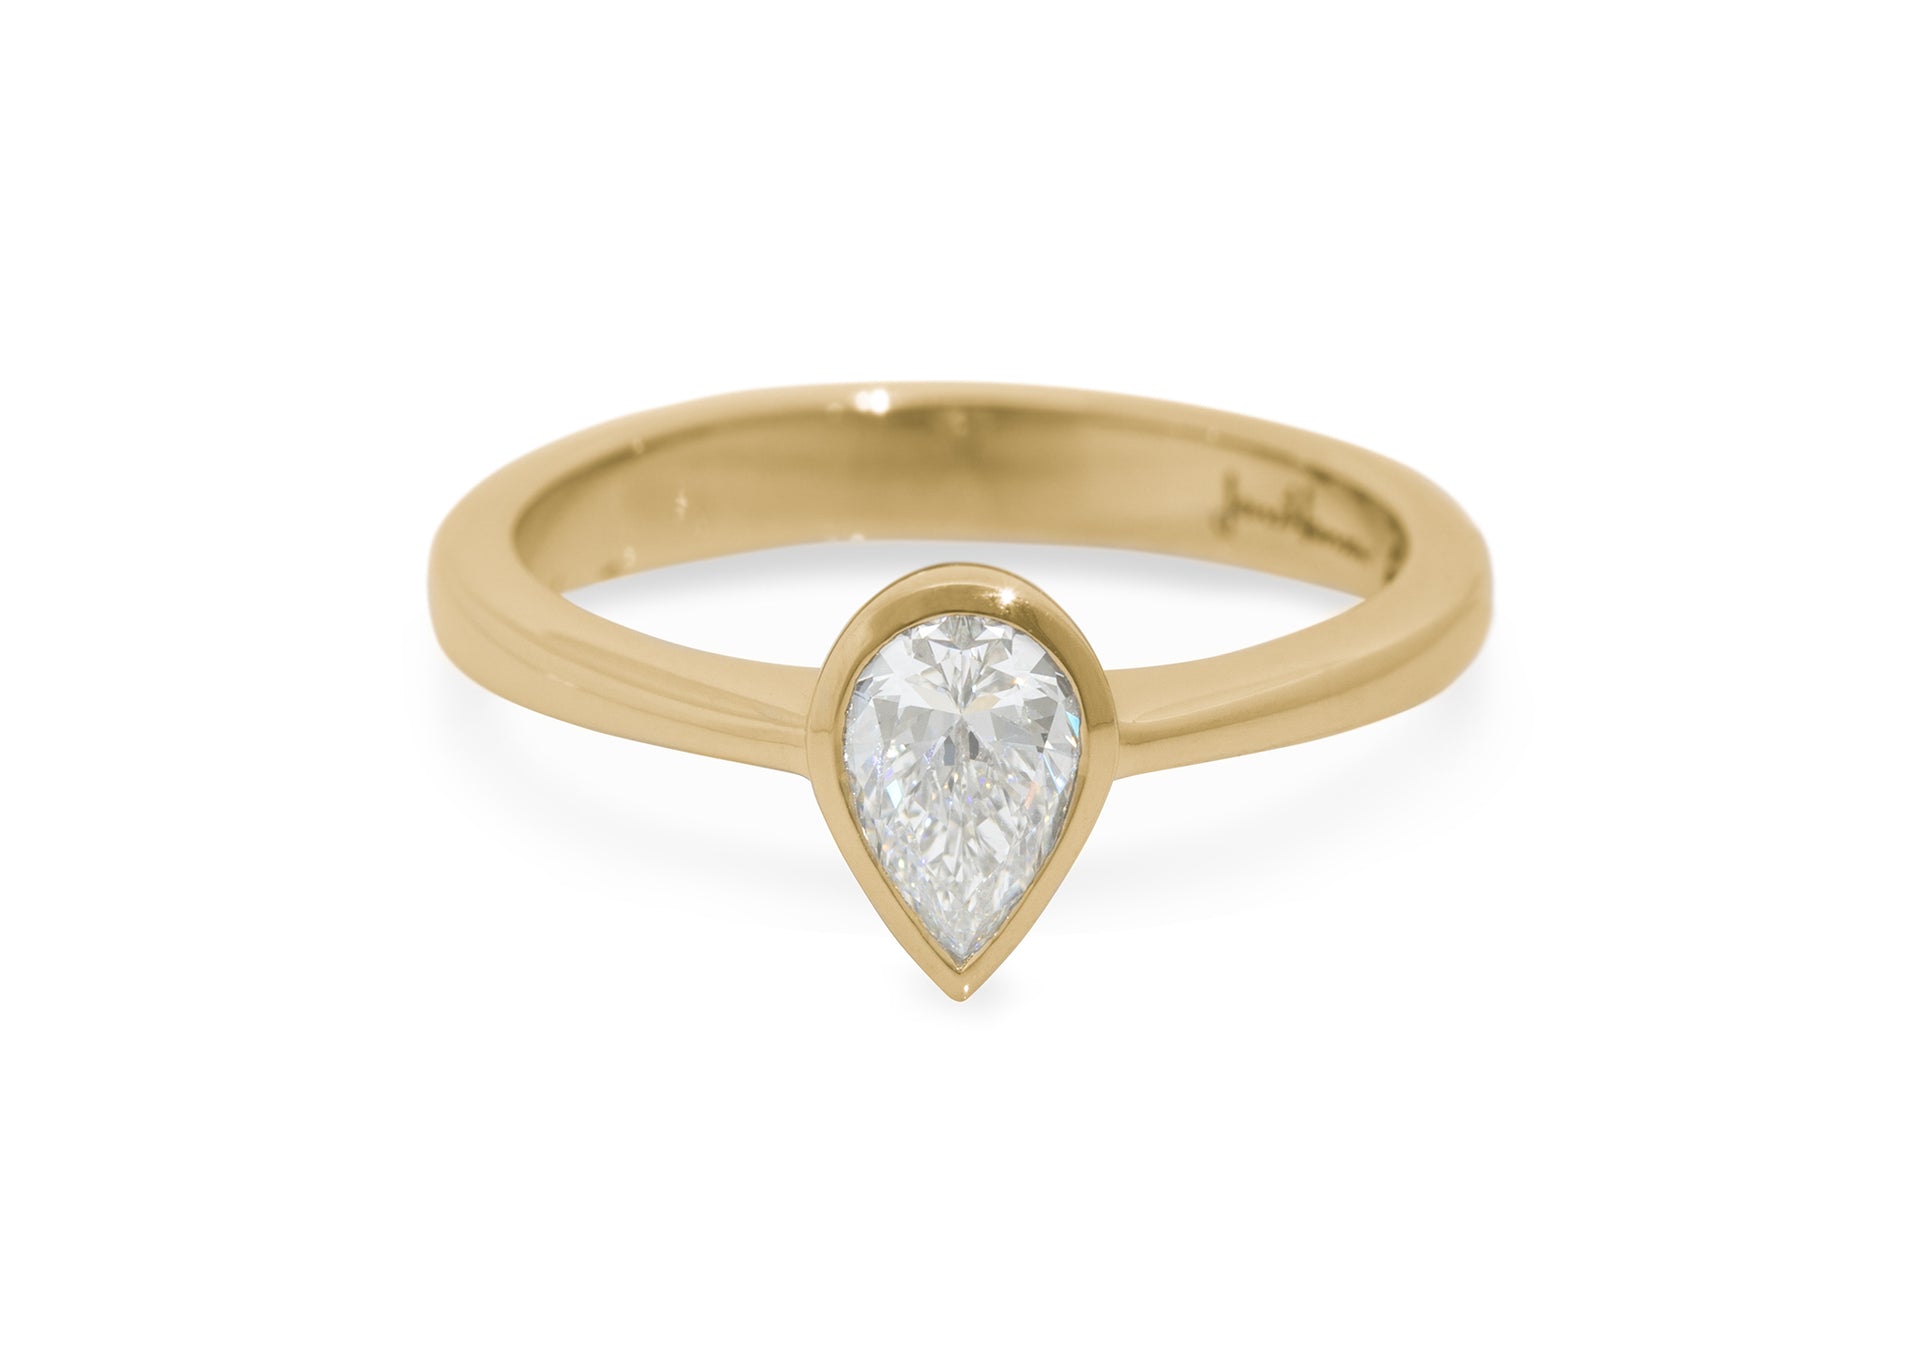 Pear Shaped Diamond Engagement Ring, Yellow Gold